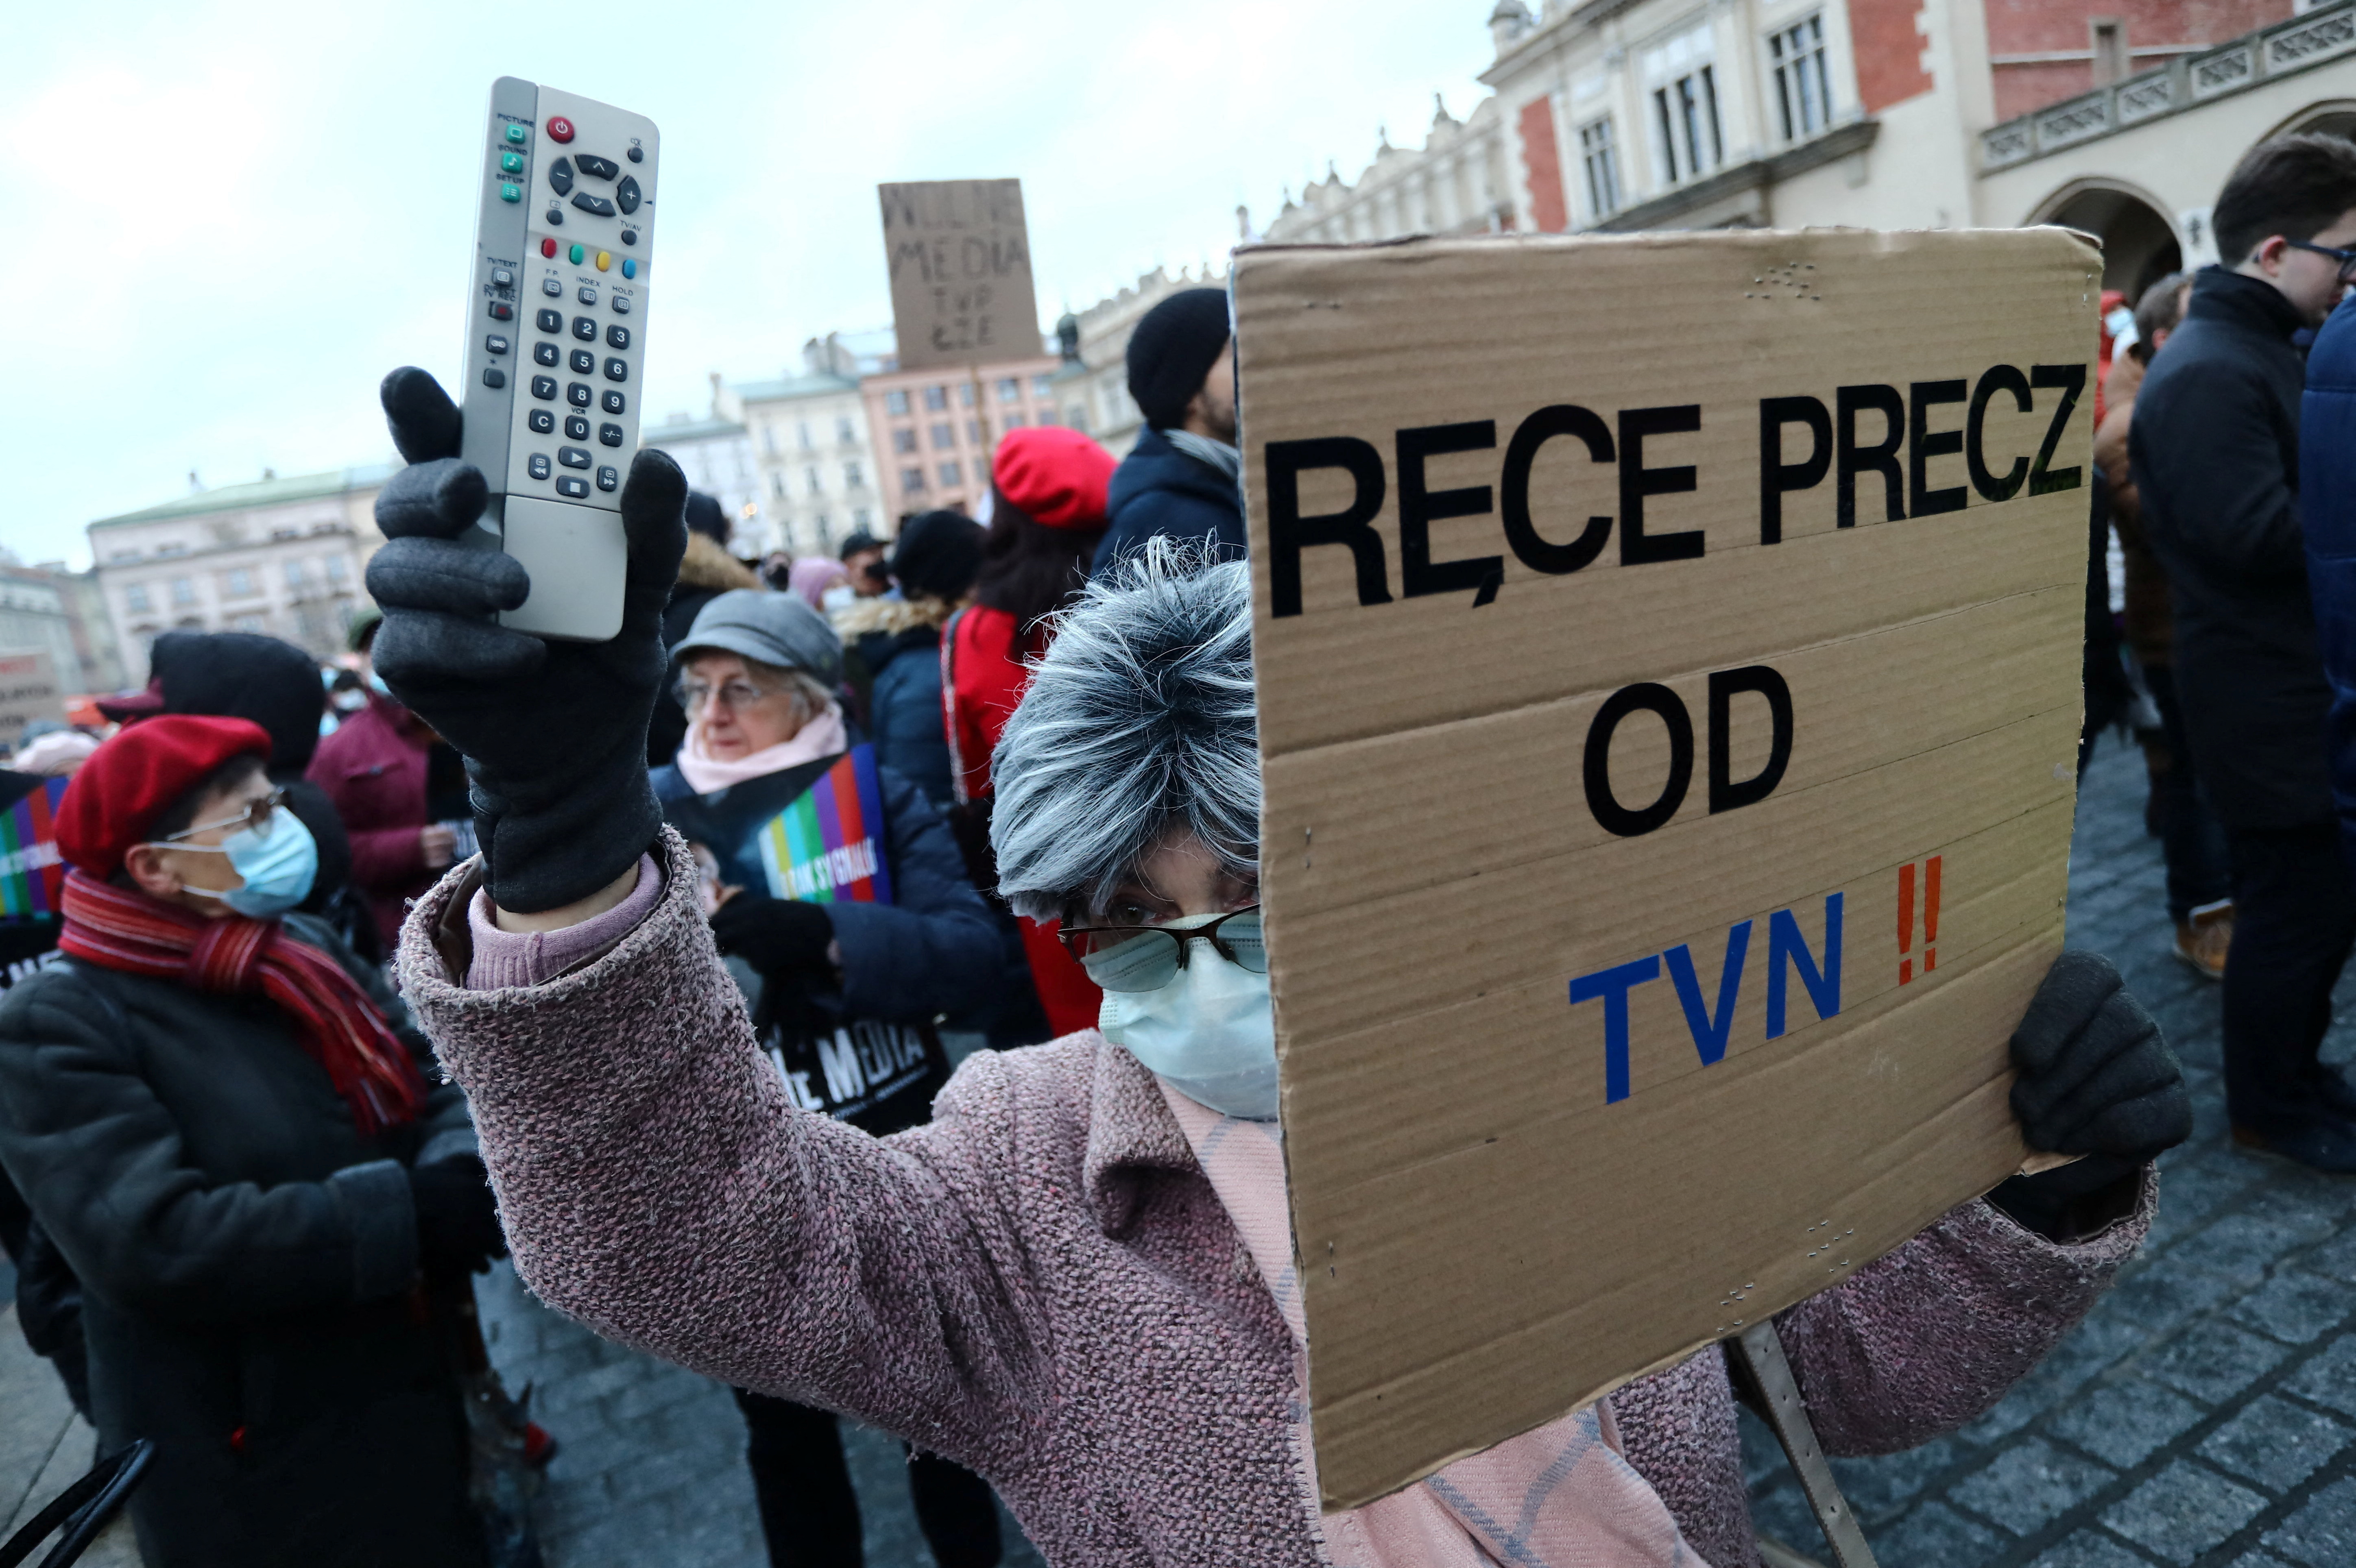 People protest against media law affecting U.S.-owned news channel in Krakow